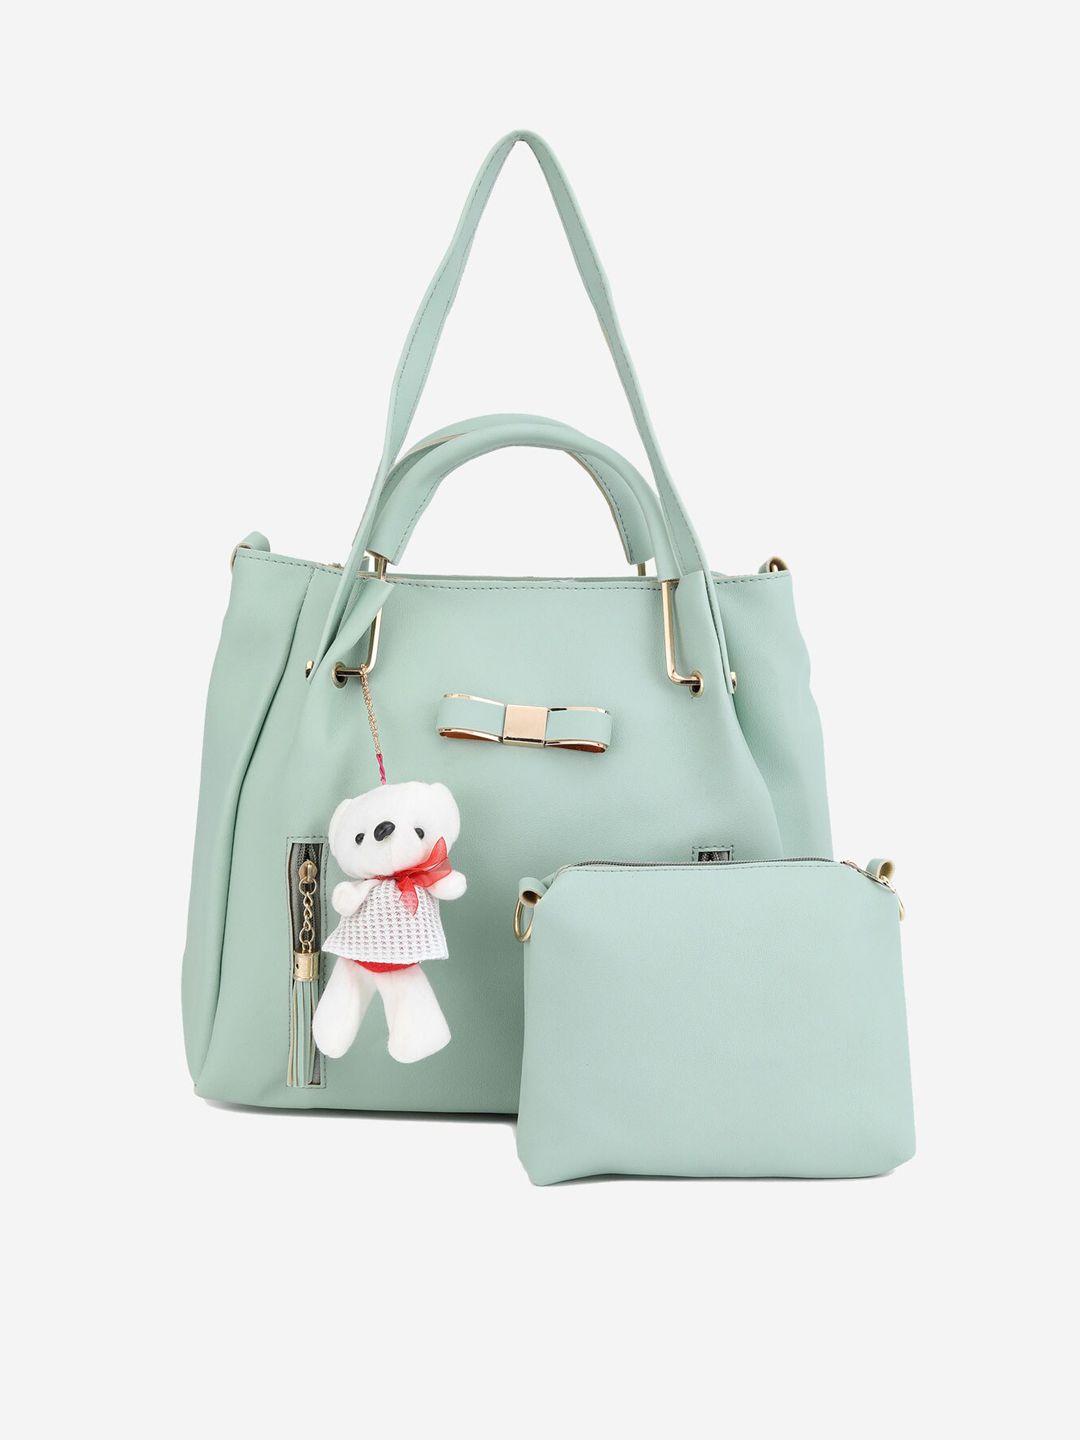 stropcarry sea green structured shoulder bag with pouch